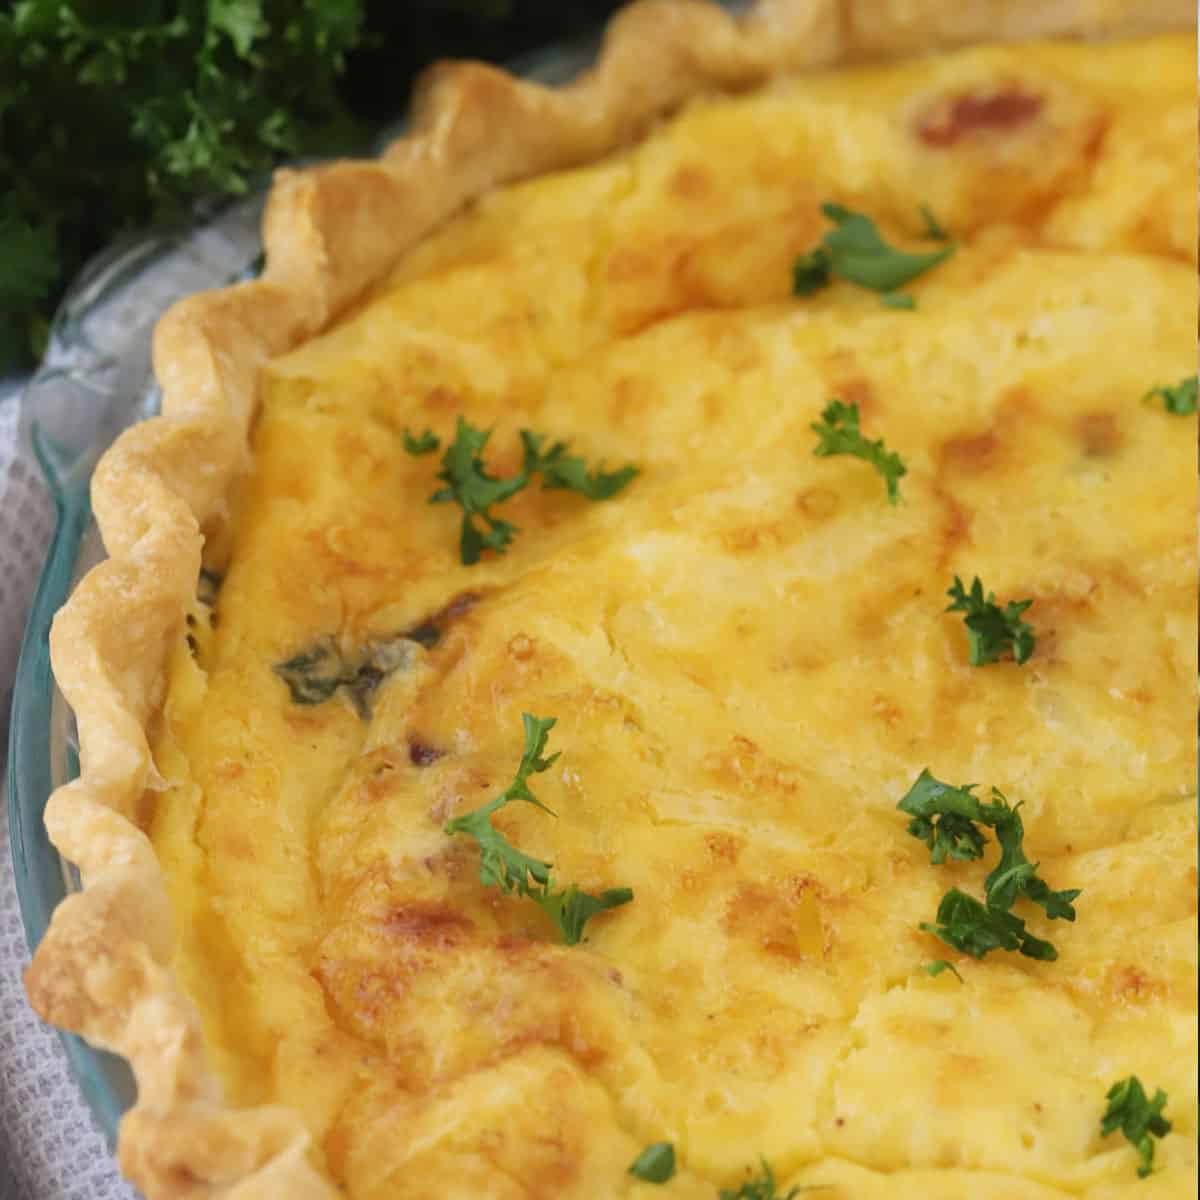 bacon asparagus Quiche on a plate, ready to be served warm or cold.